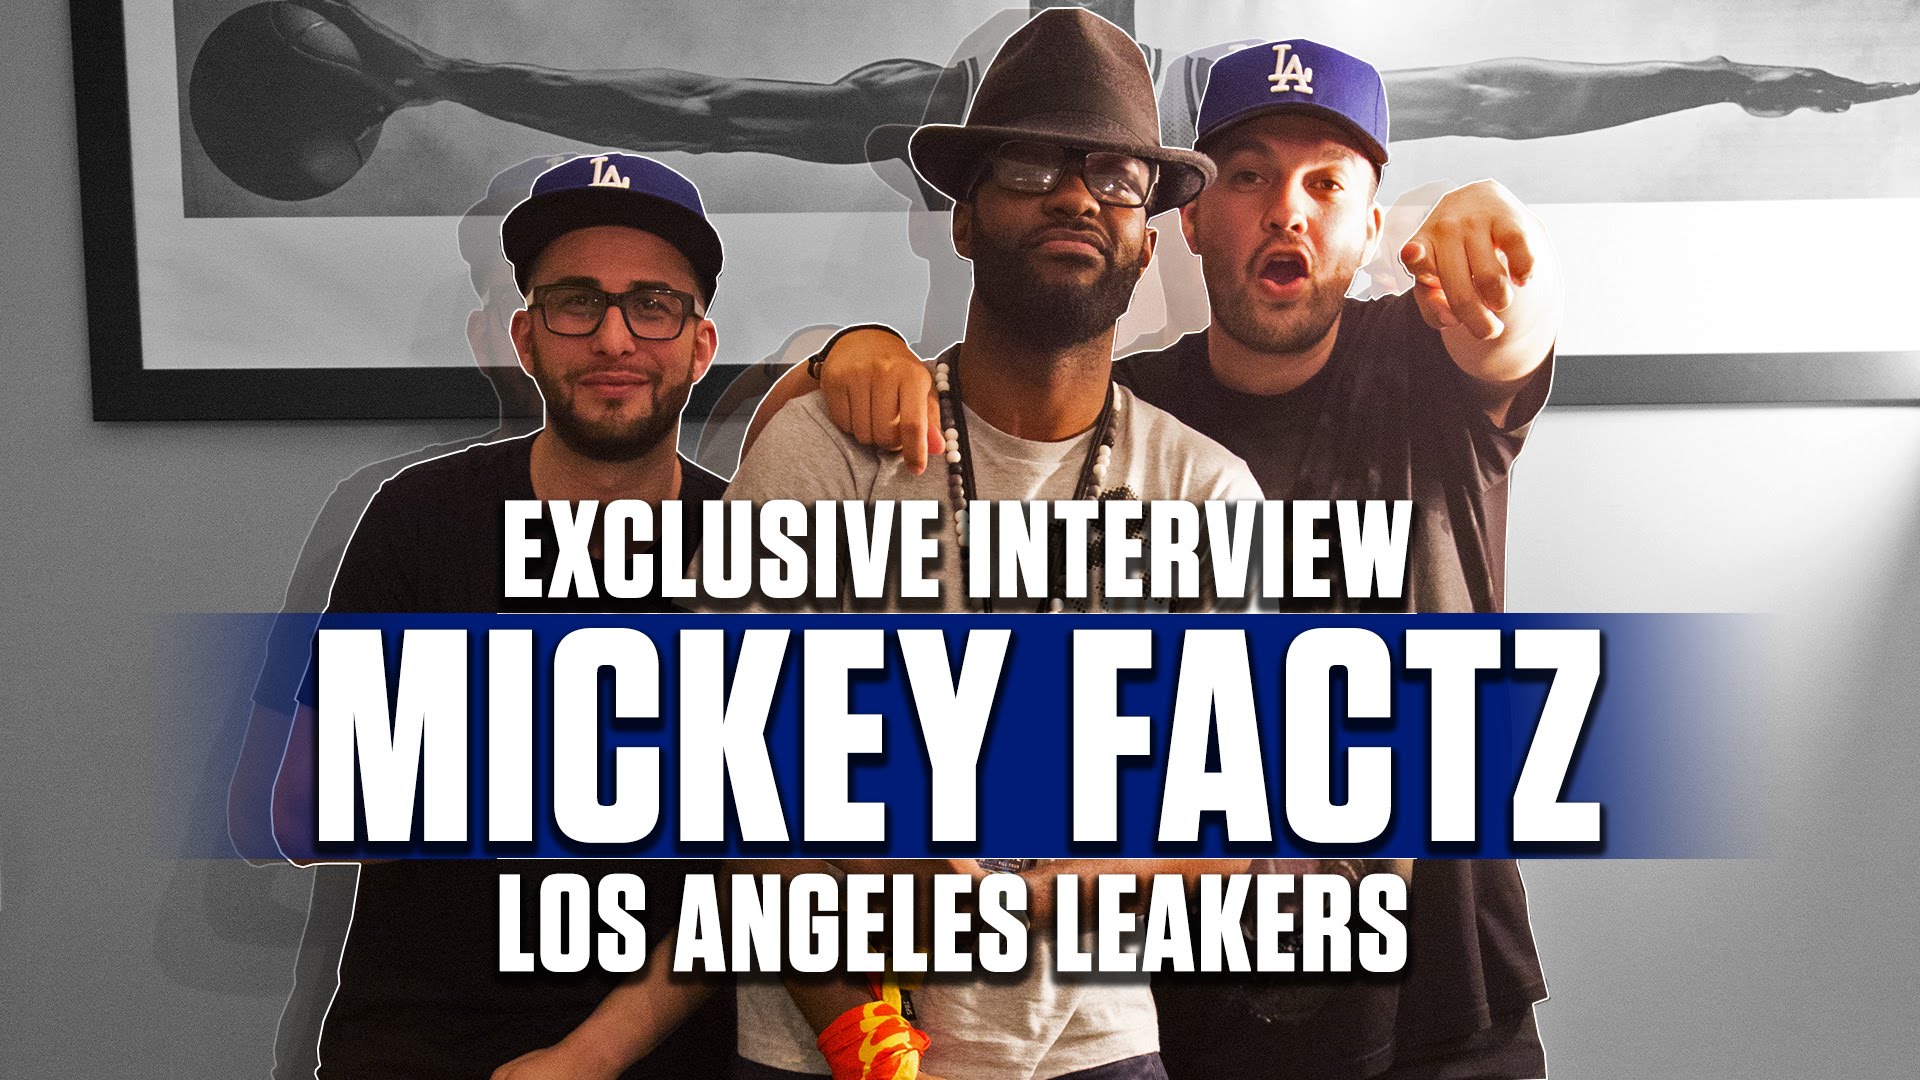 Mickey Factz Talks Upcoming Project, Working With Diddy, & More w/ The L.A. Leakers